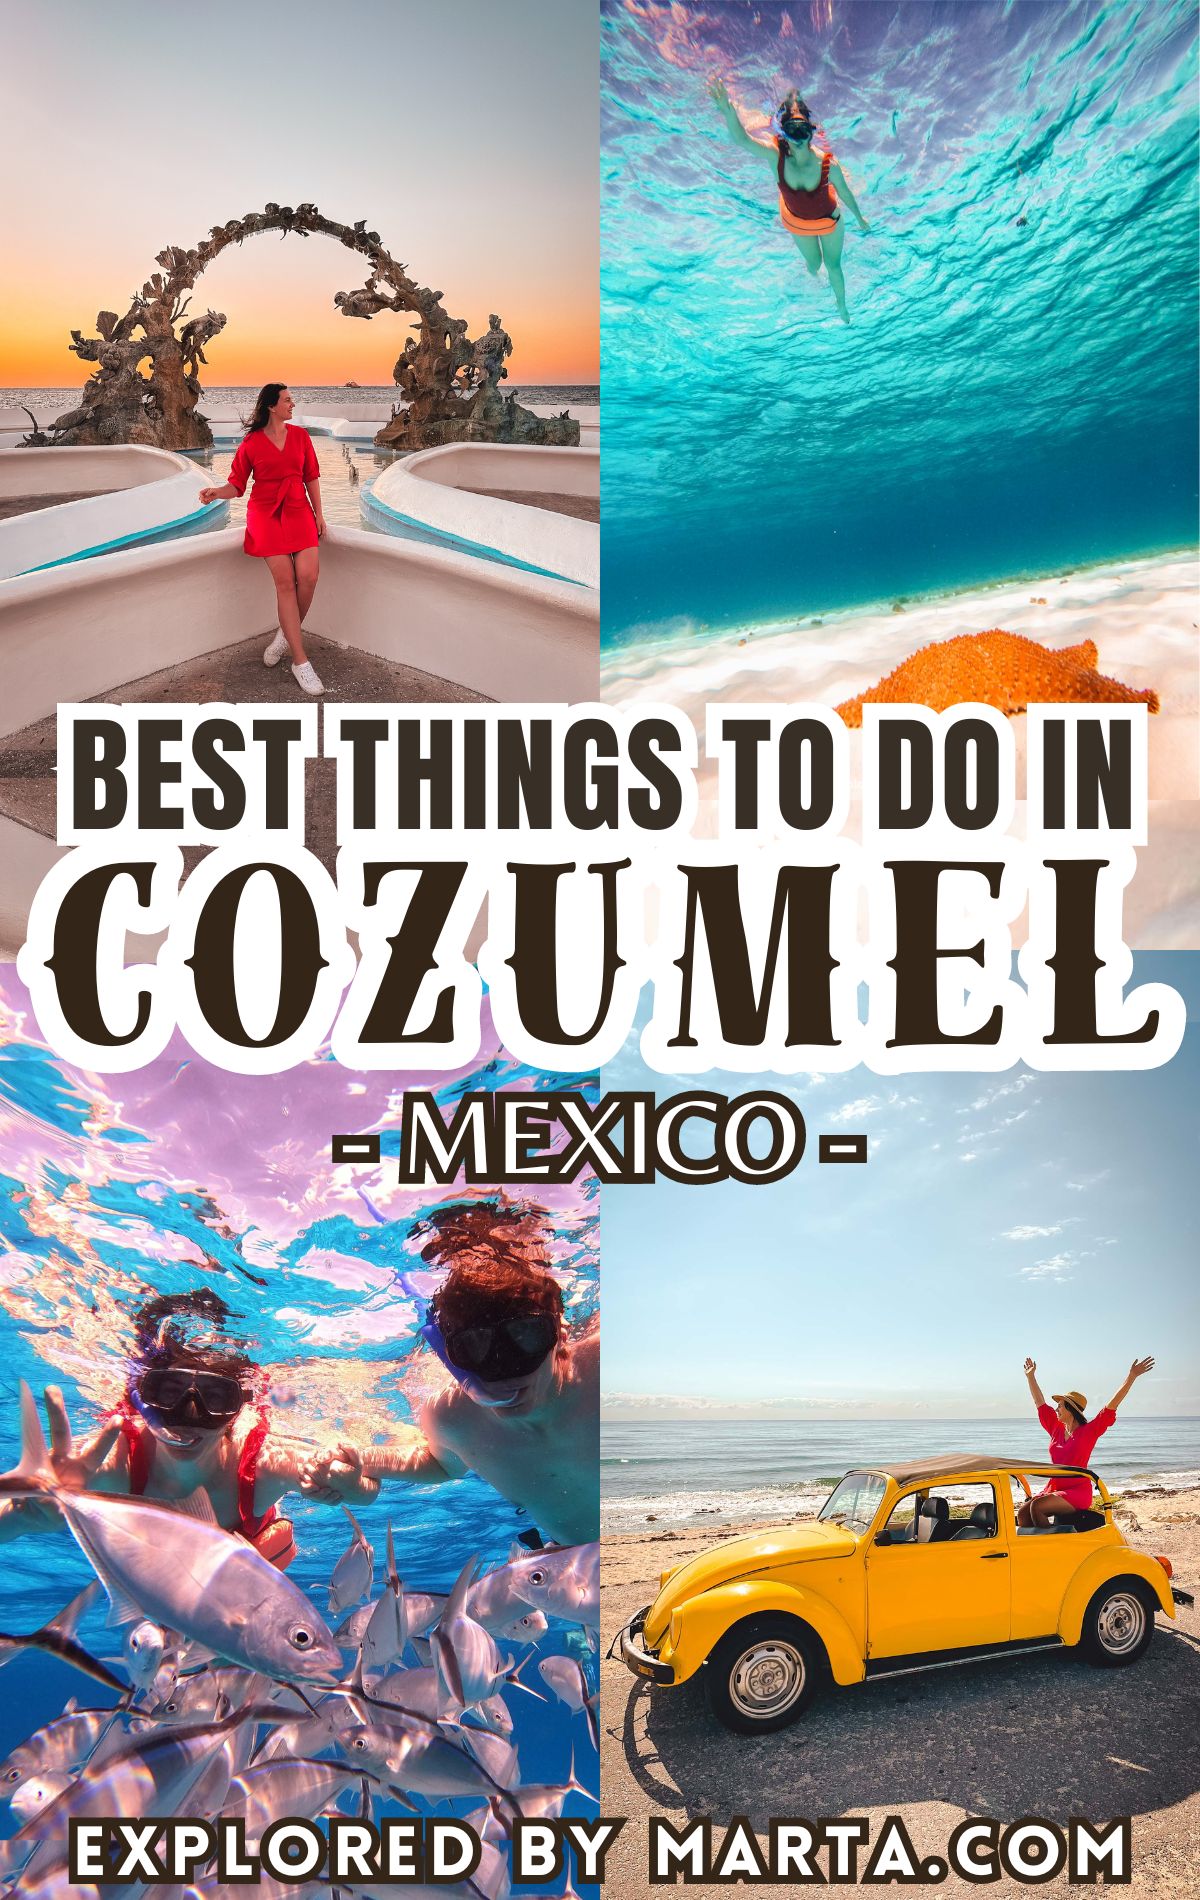 Best things to do in Cozumel, Mexico